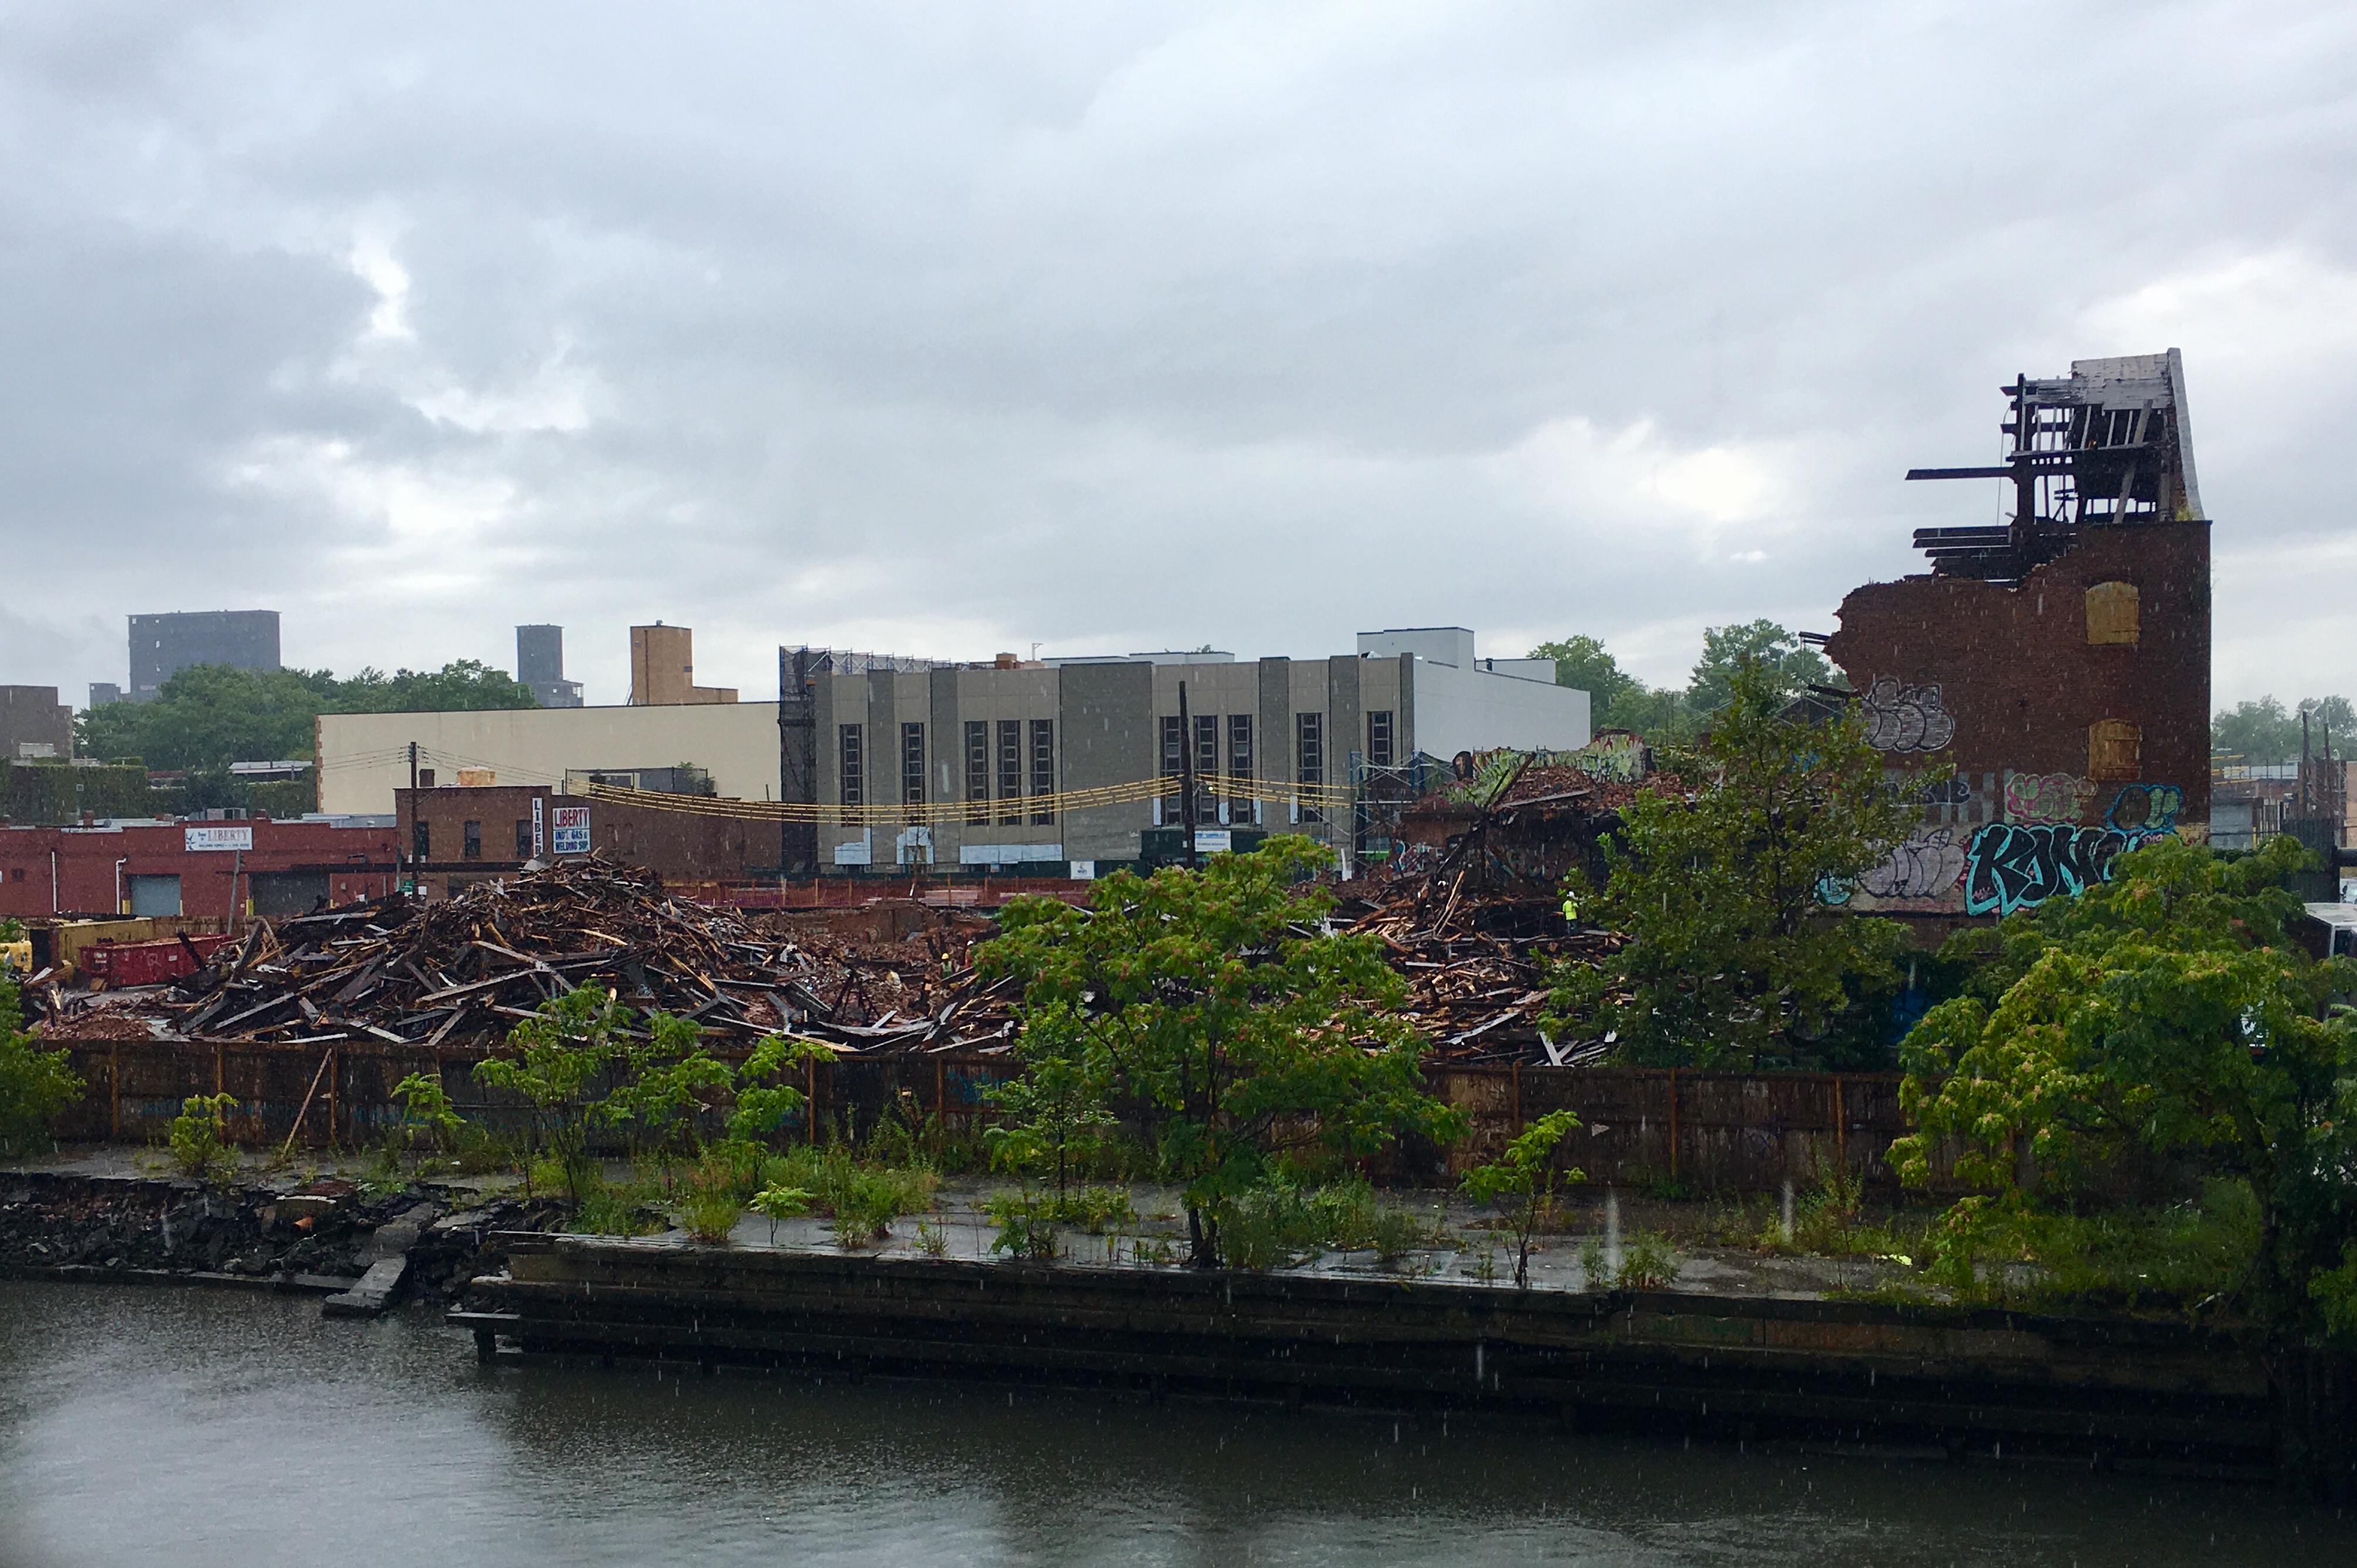 The S.W. Bowne Grain Storehouse has now been almost completely demolished. Eagle photo by Lore Croghan 